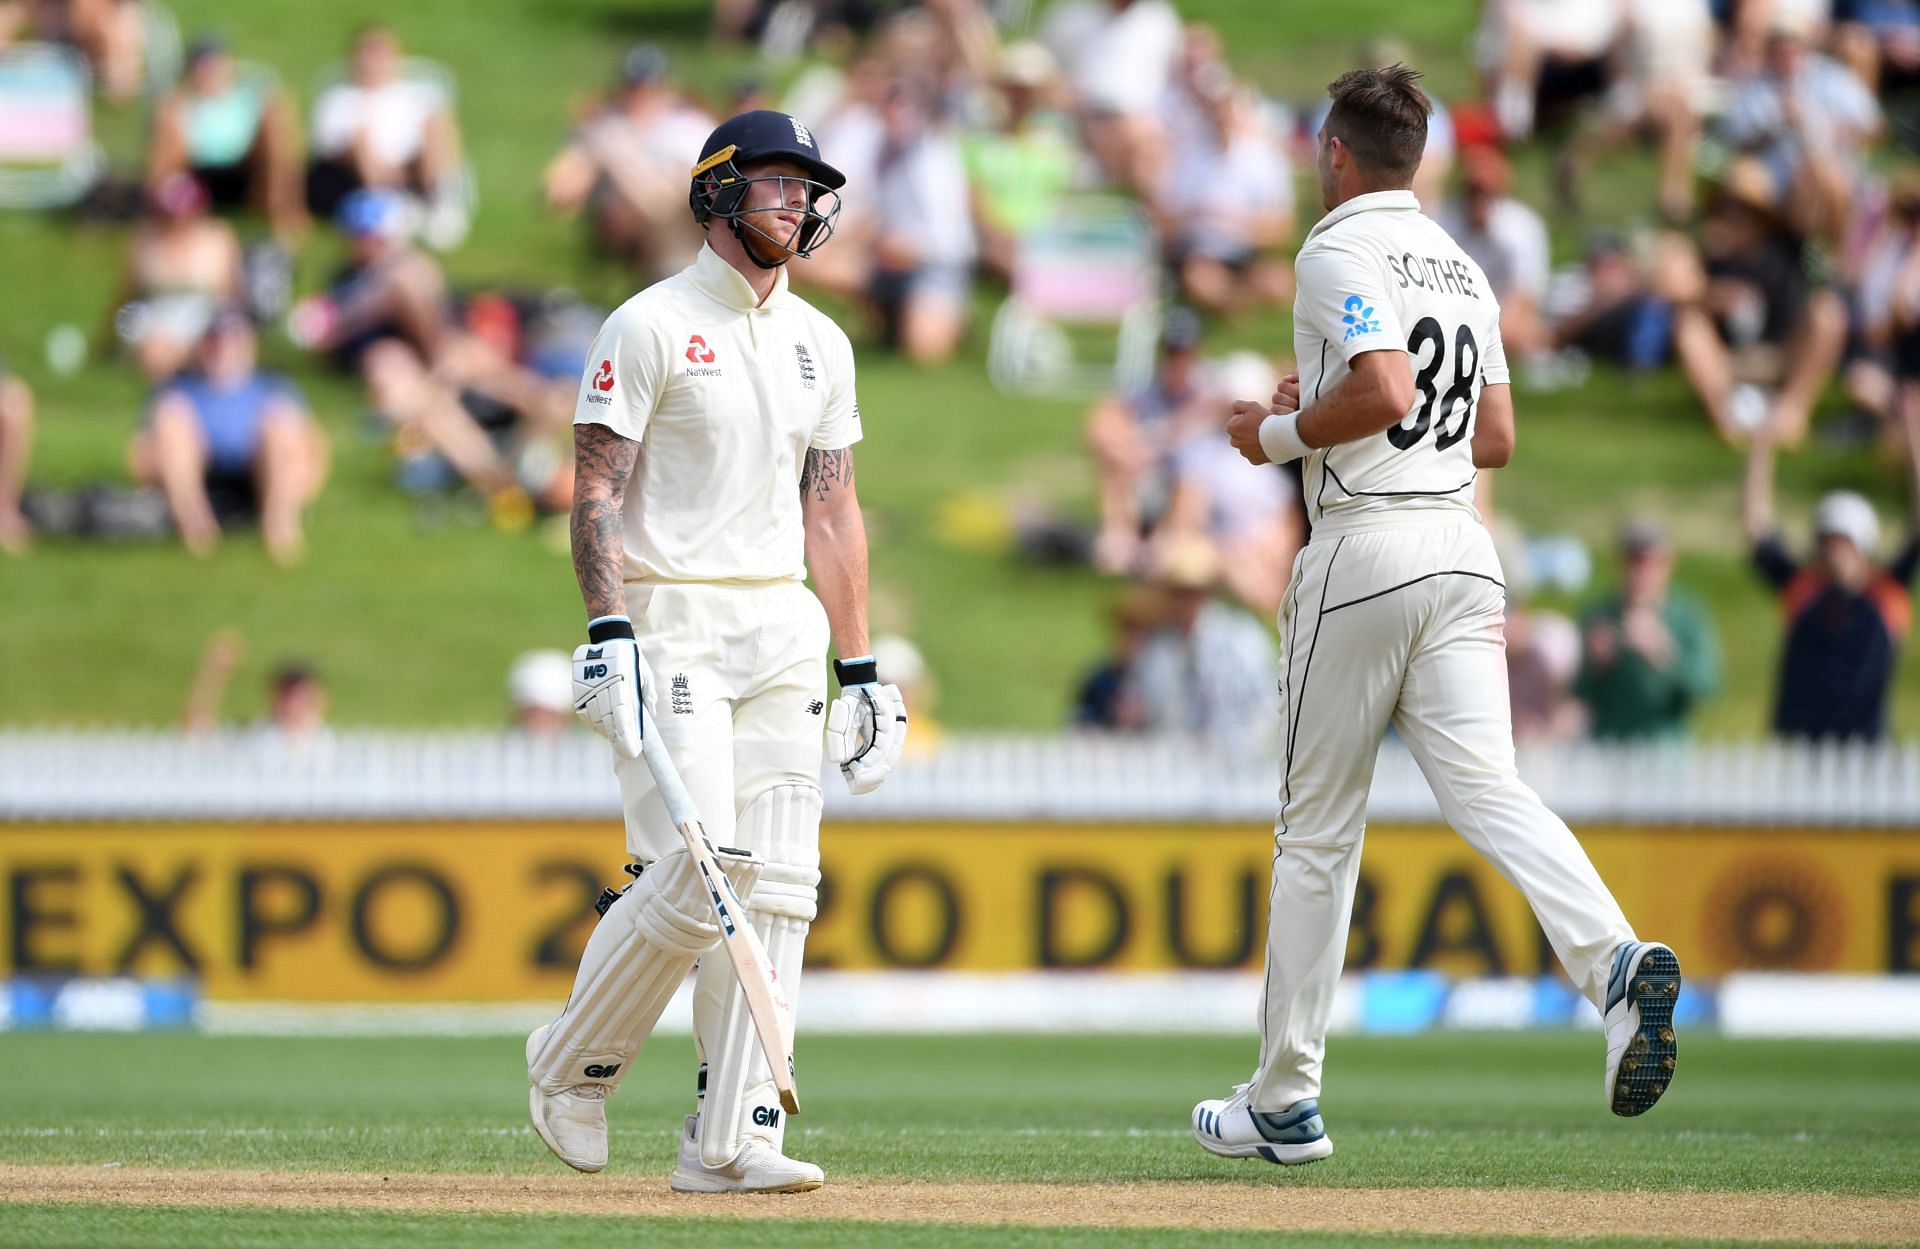 New Zealand v England - Second Test: Day 3